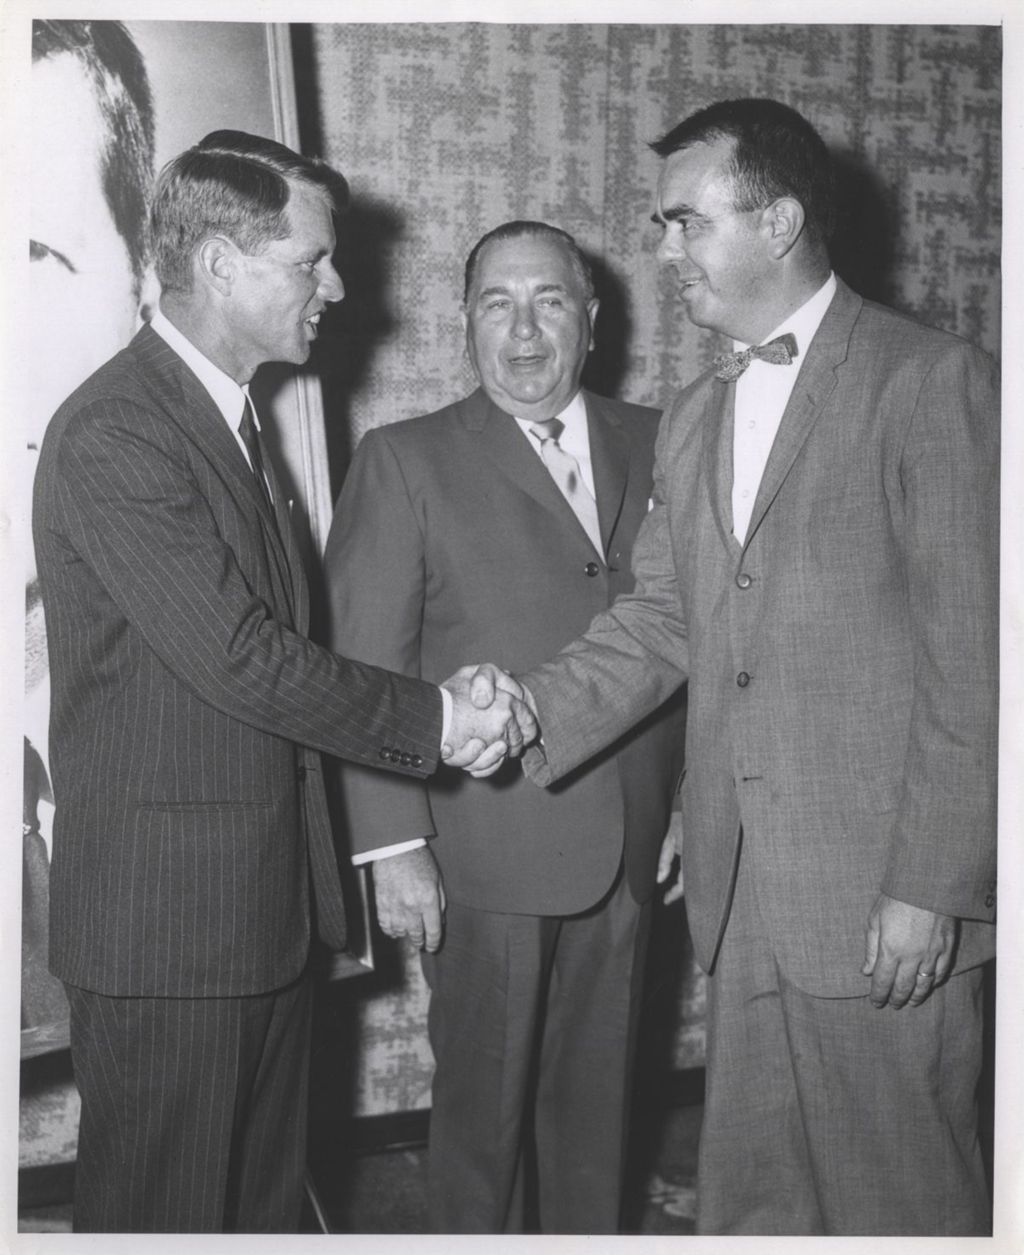 Robert F. Kennedy and Richard J. Daley at an exhibition